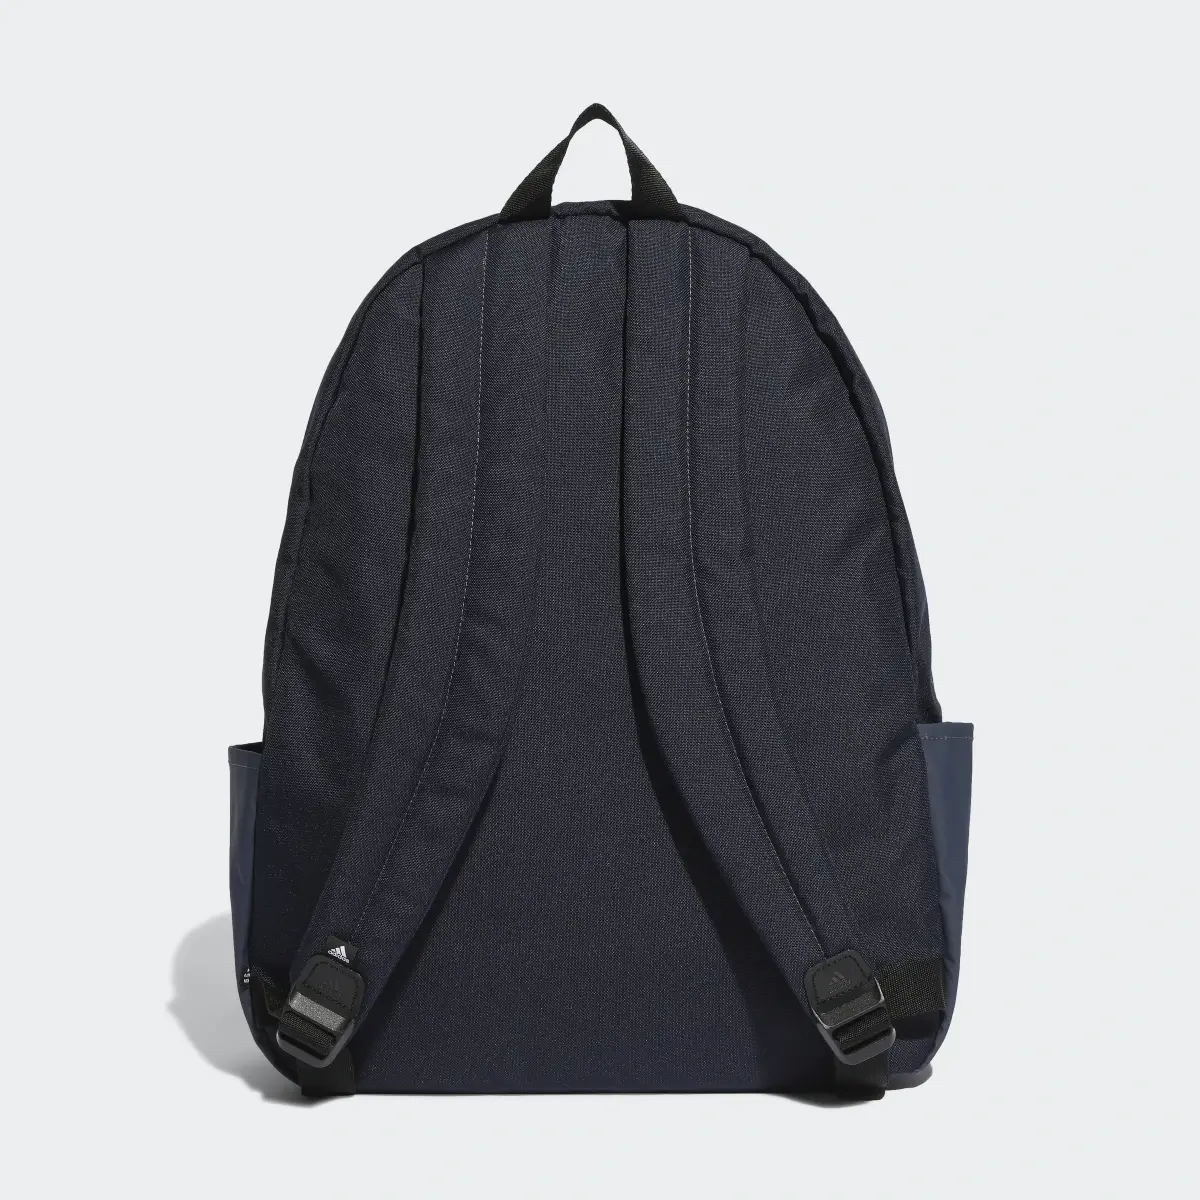 Adidas Classic Badge of Sport Backpack. 3